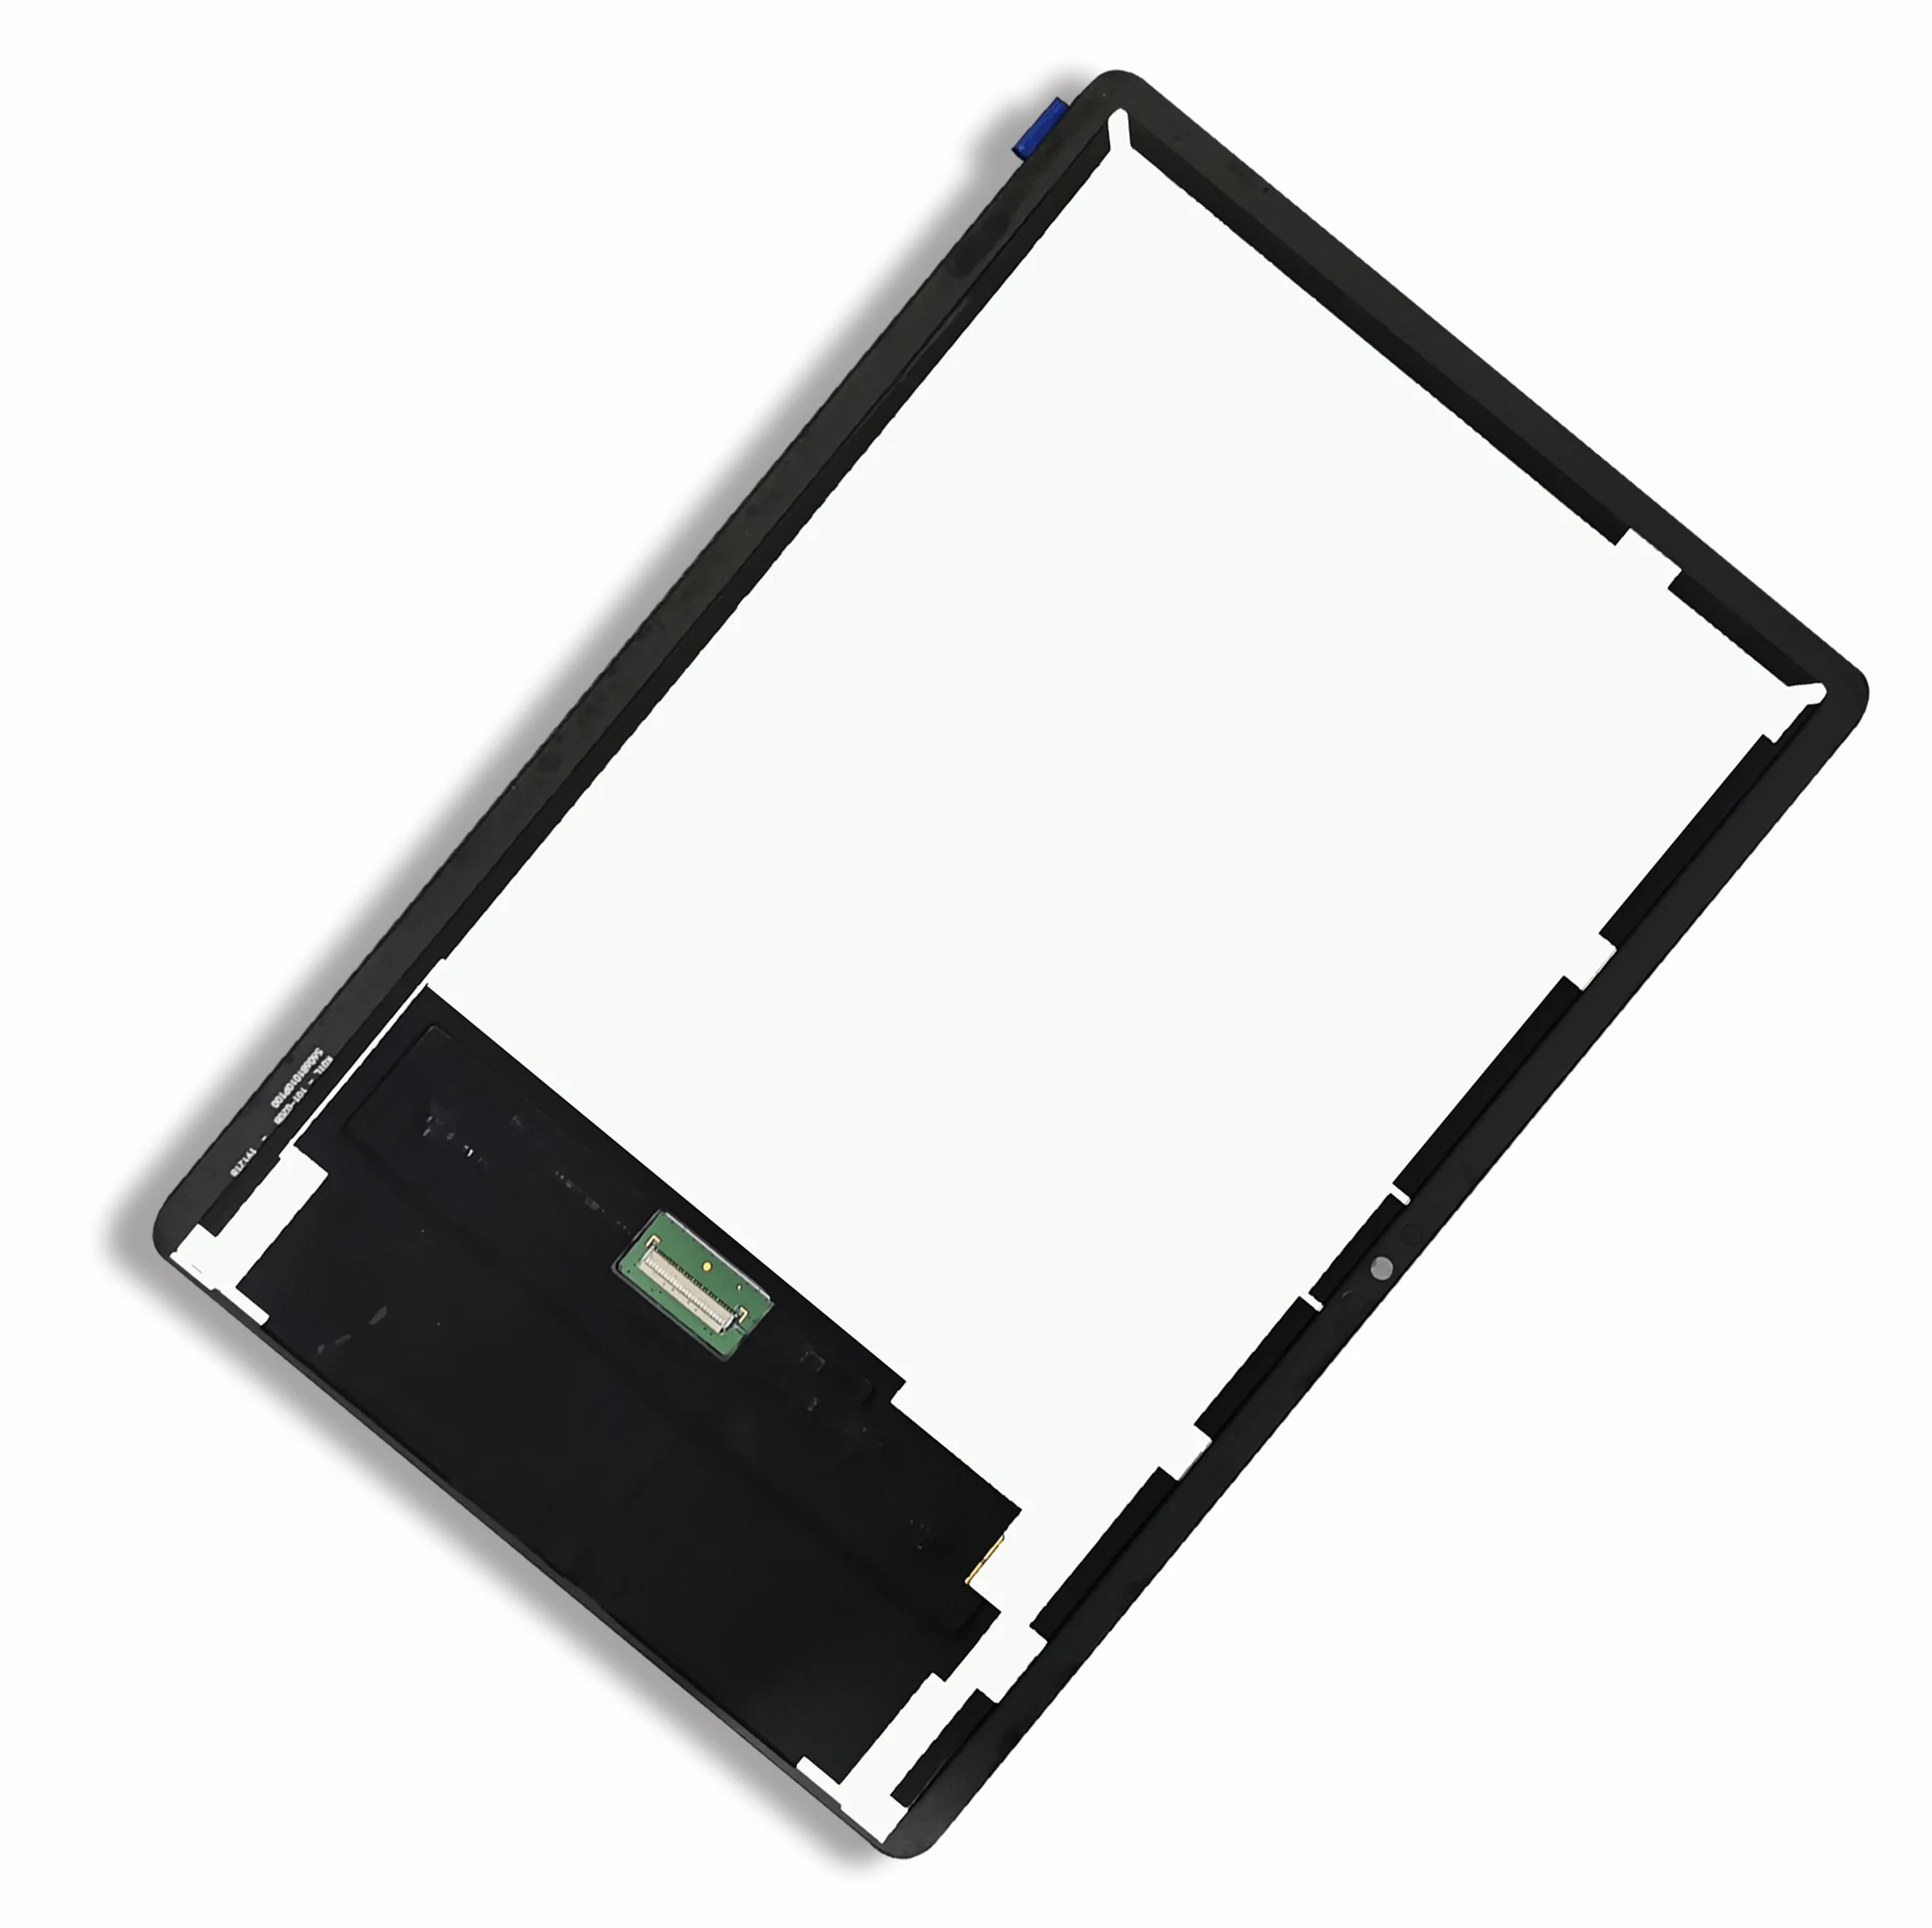  JayTong LCD Display & Replacement Touch Screen Digitizer  Assembly with Free Tools for Hua-wei Media-pad T3 10 AGS-L03 AGS-L09  AGS-W09 Black : Cell Phones & Accessories